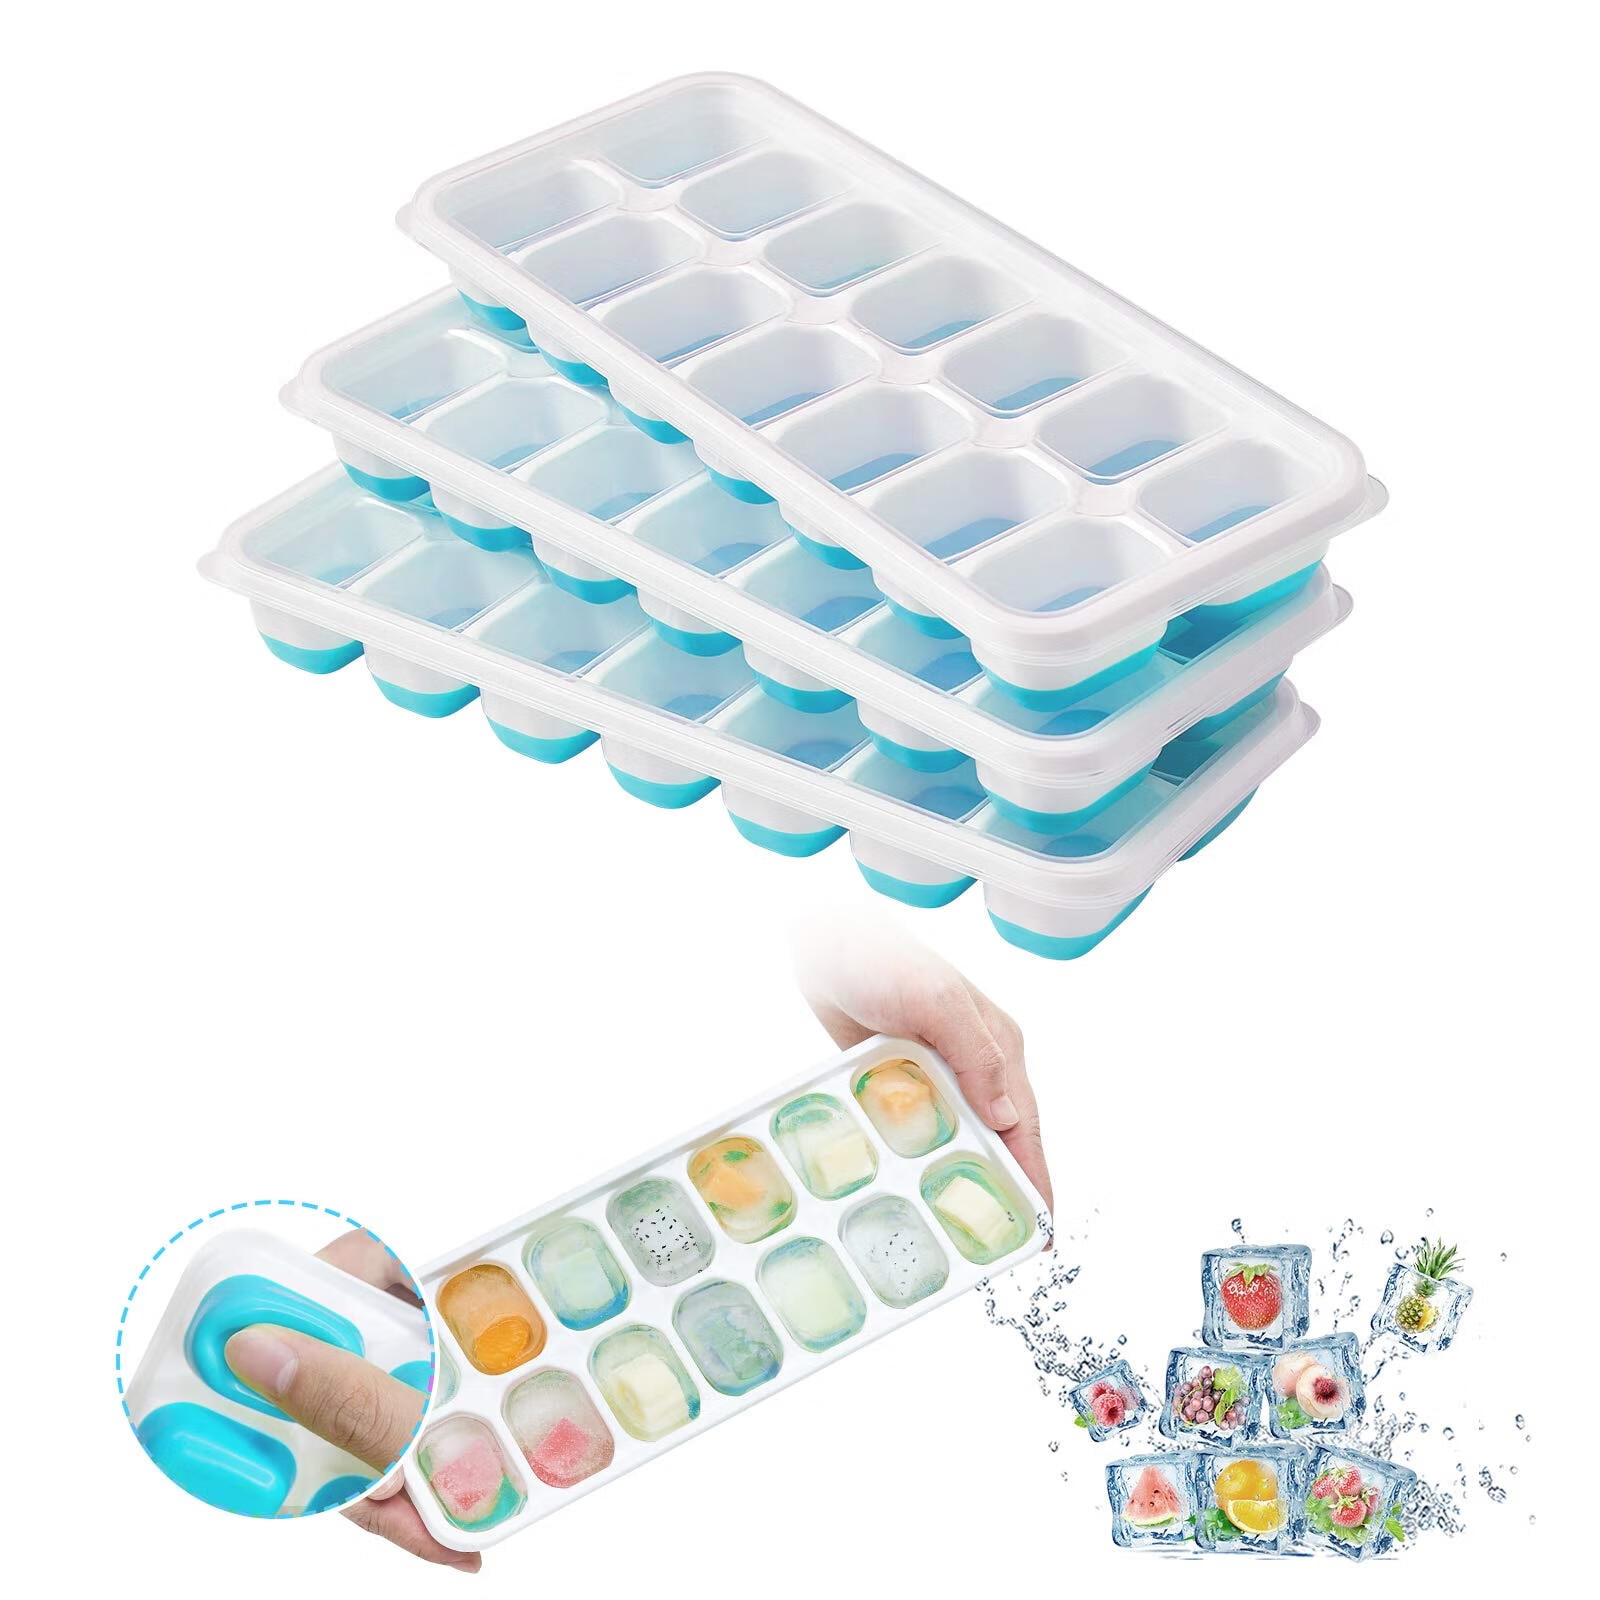 PTNITWO Ice Cube Trays, Easy-Release & Flexible 14-Ice Cube Trays with Spill-Resistant Removable Lid, Ice Trays for Freezer,Silicone Ice Cube Tray,Super